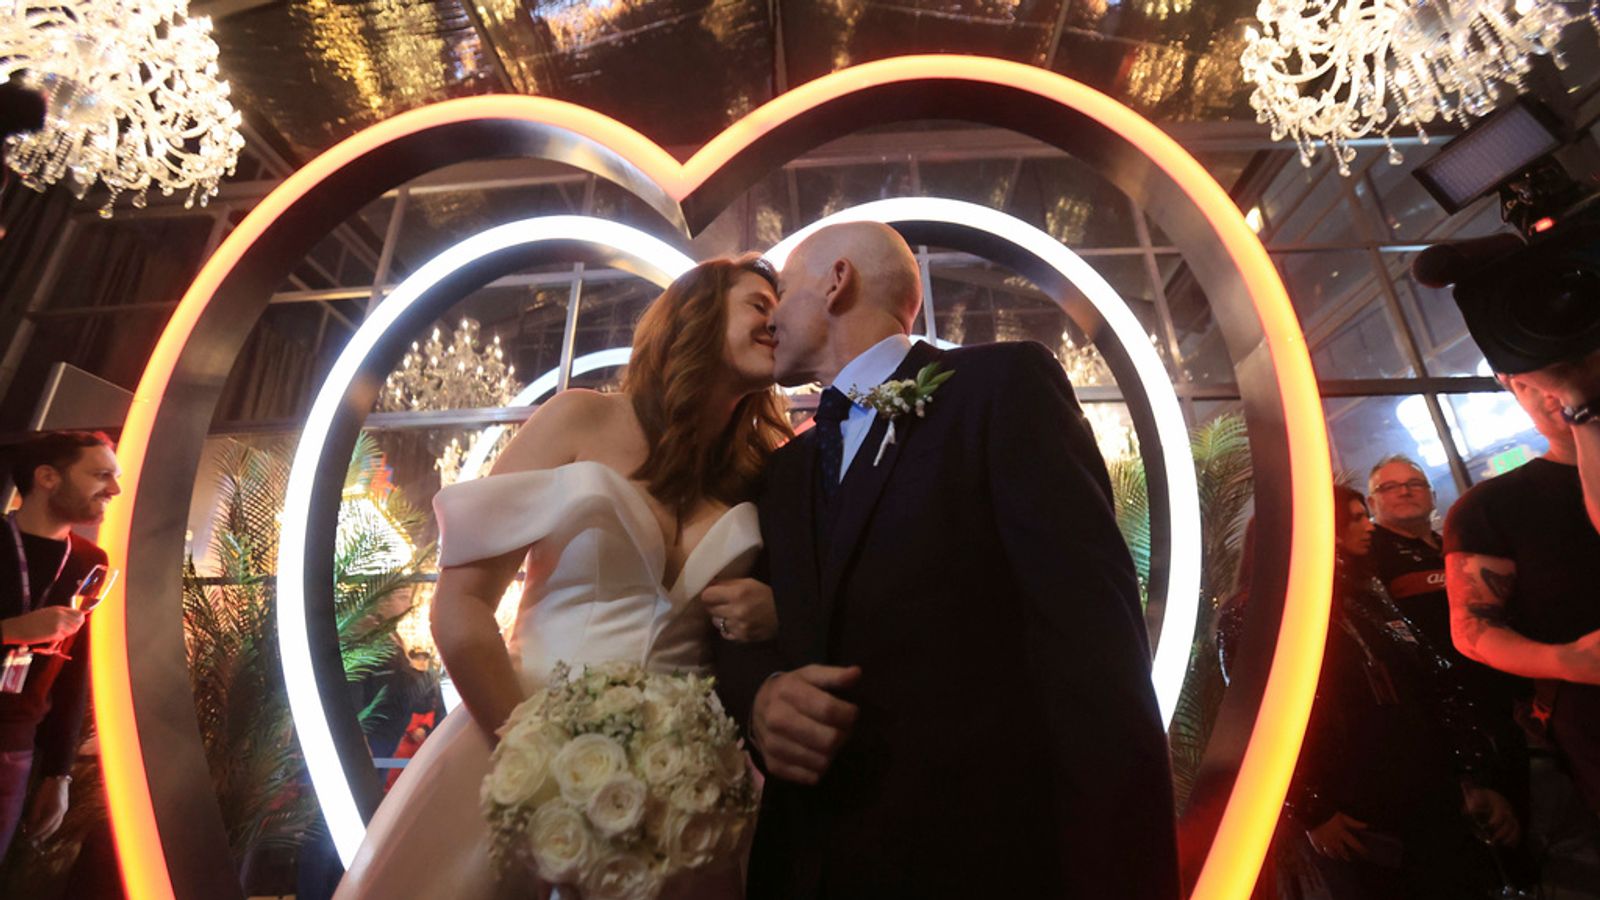 Las Vegas weddings could set new record on New Year's Eve due to 'specialty date'